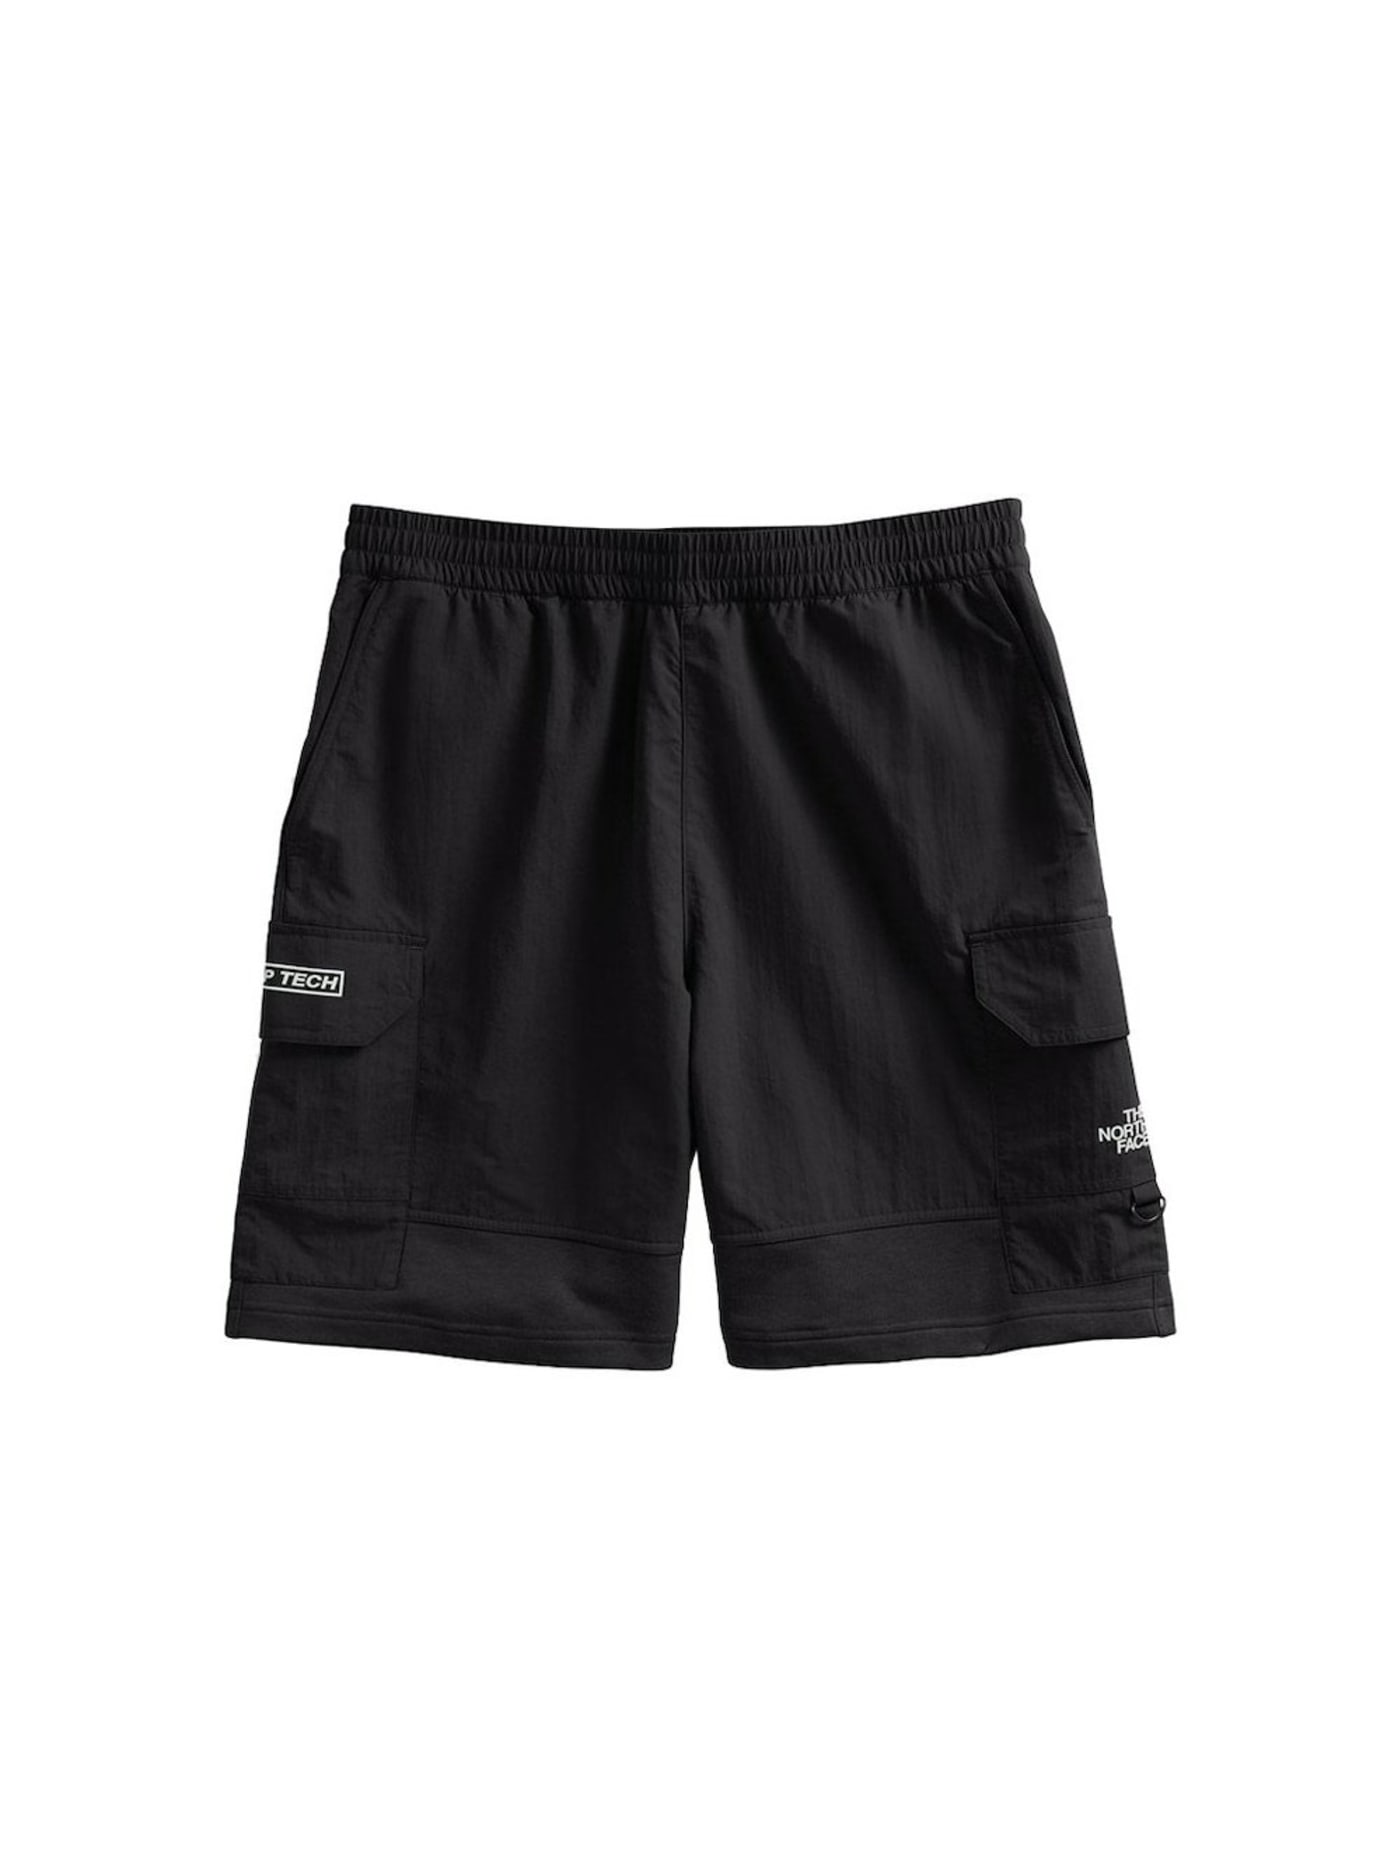 15 Best Shorts To Buy Right Now: Designer to Streetwear Shorts 